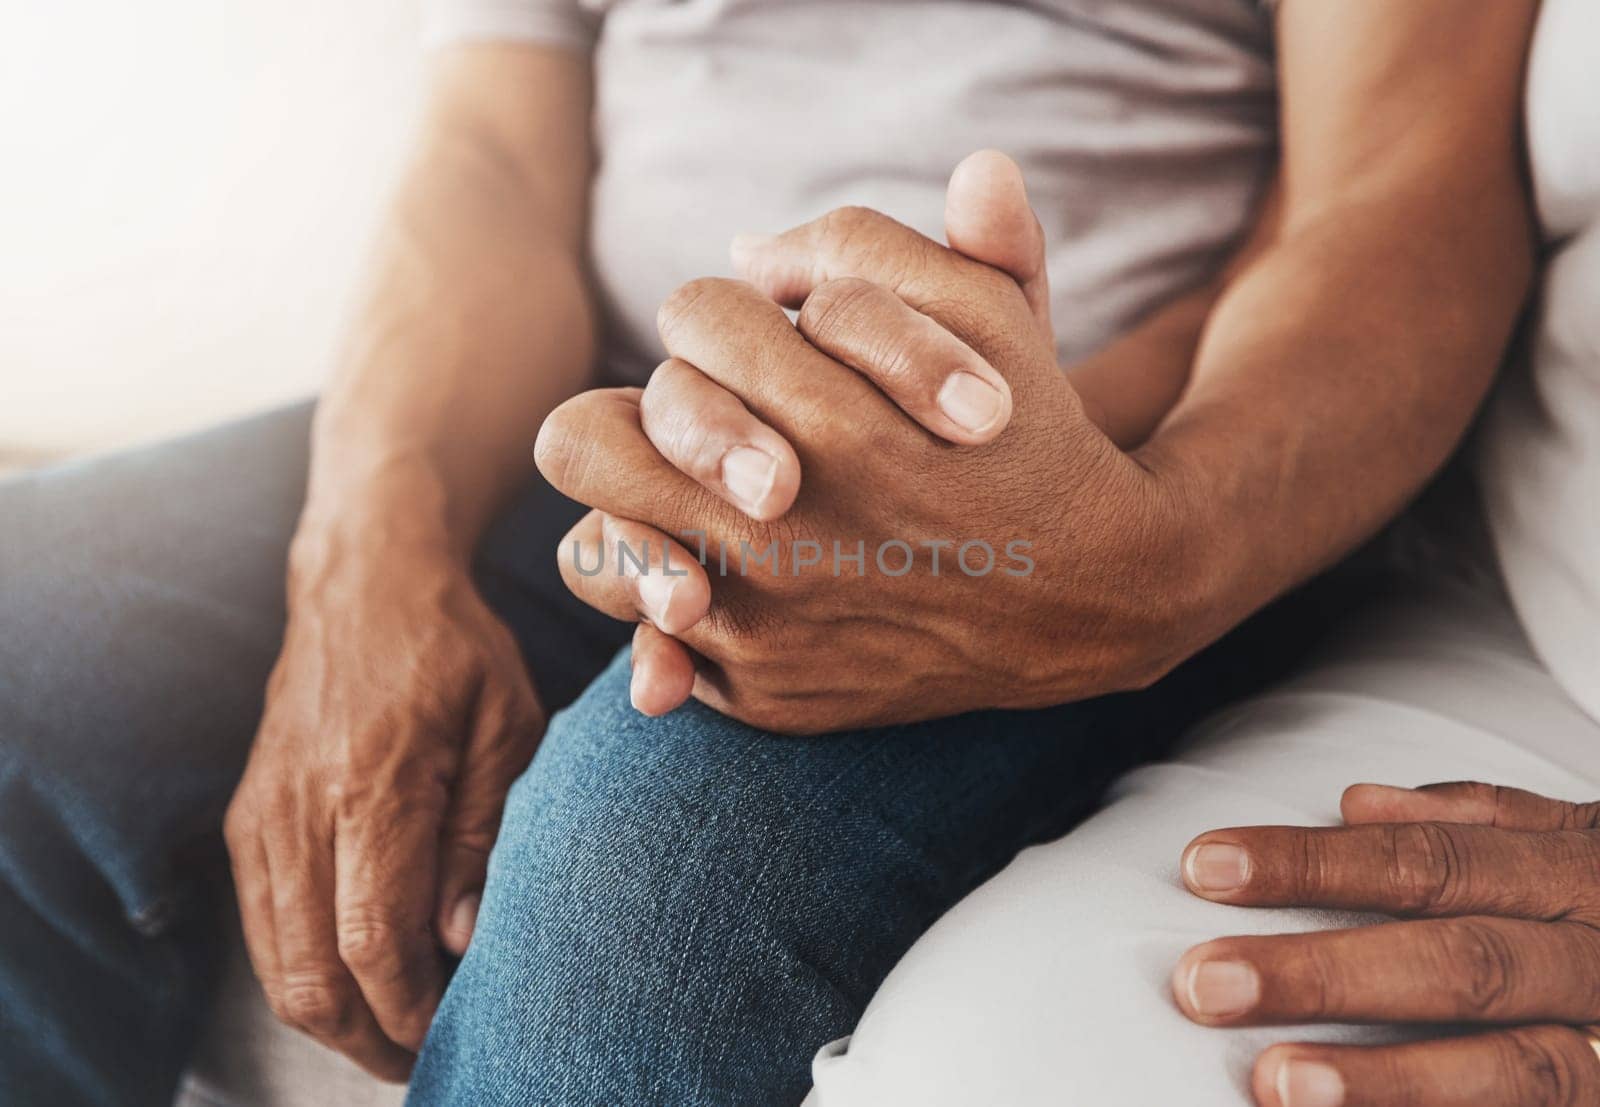 Senior, love and couple holding hands for support, prayer or empathy, trust or affection. Valentines day, romance and elderly man and woman together for respect, worship or praying for hope and peace.